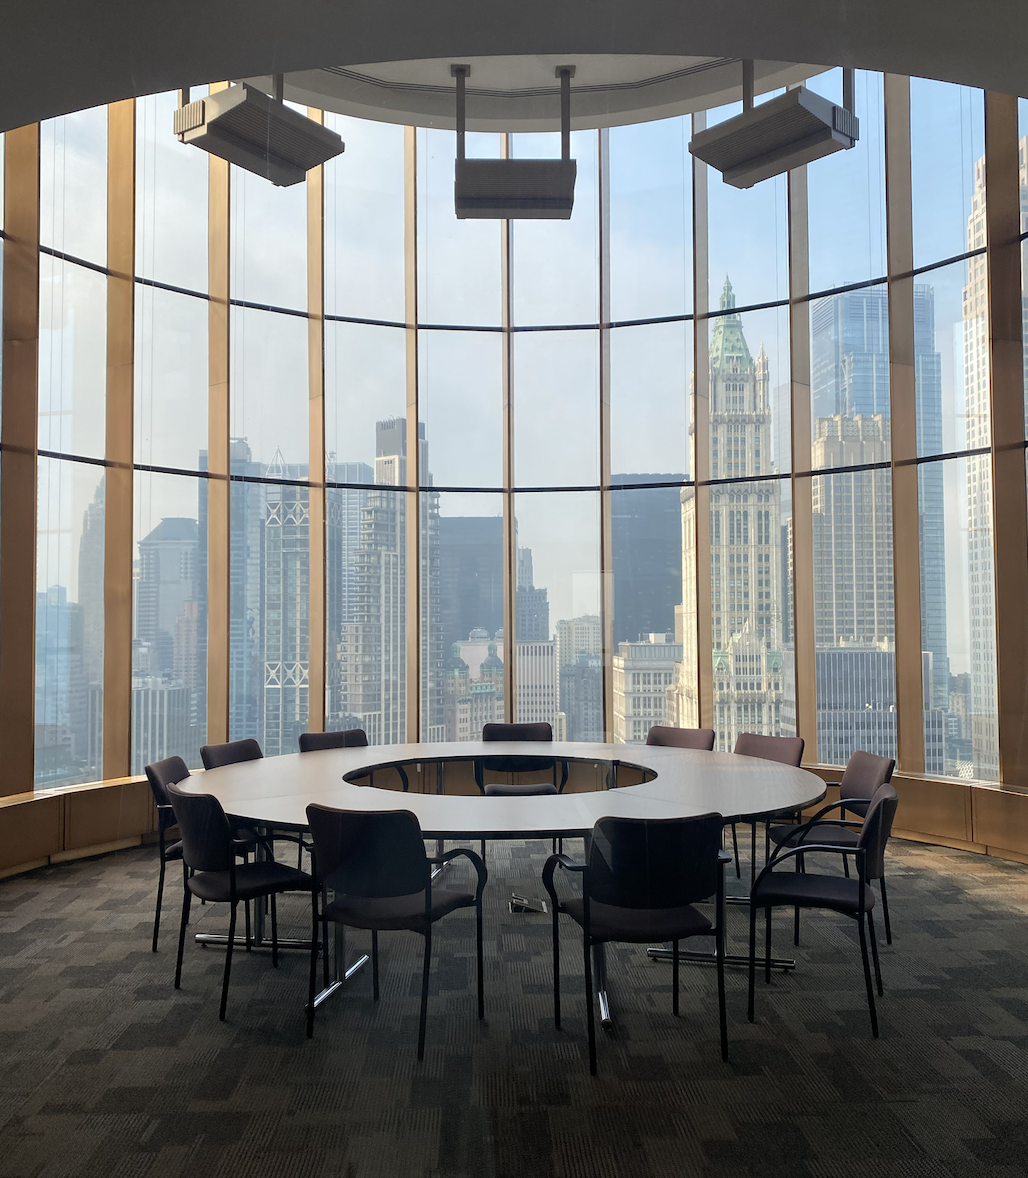 A roundtable and chairs in an office space with floor-to-ceiling windows overlooking the New York City skyline.